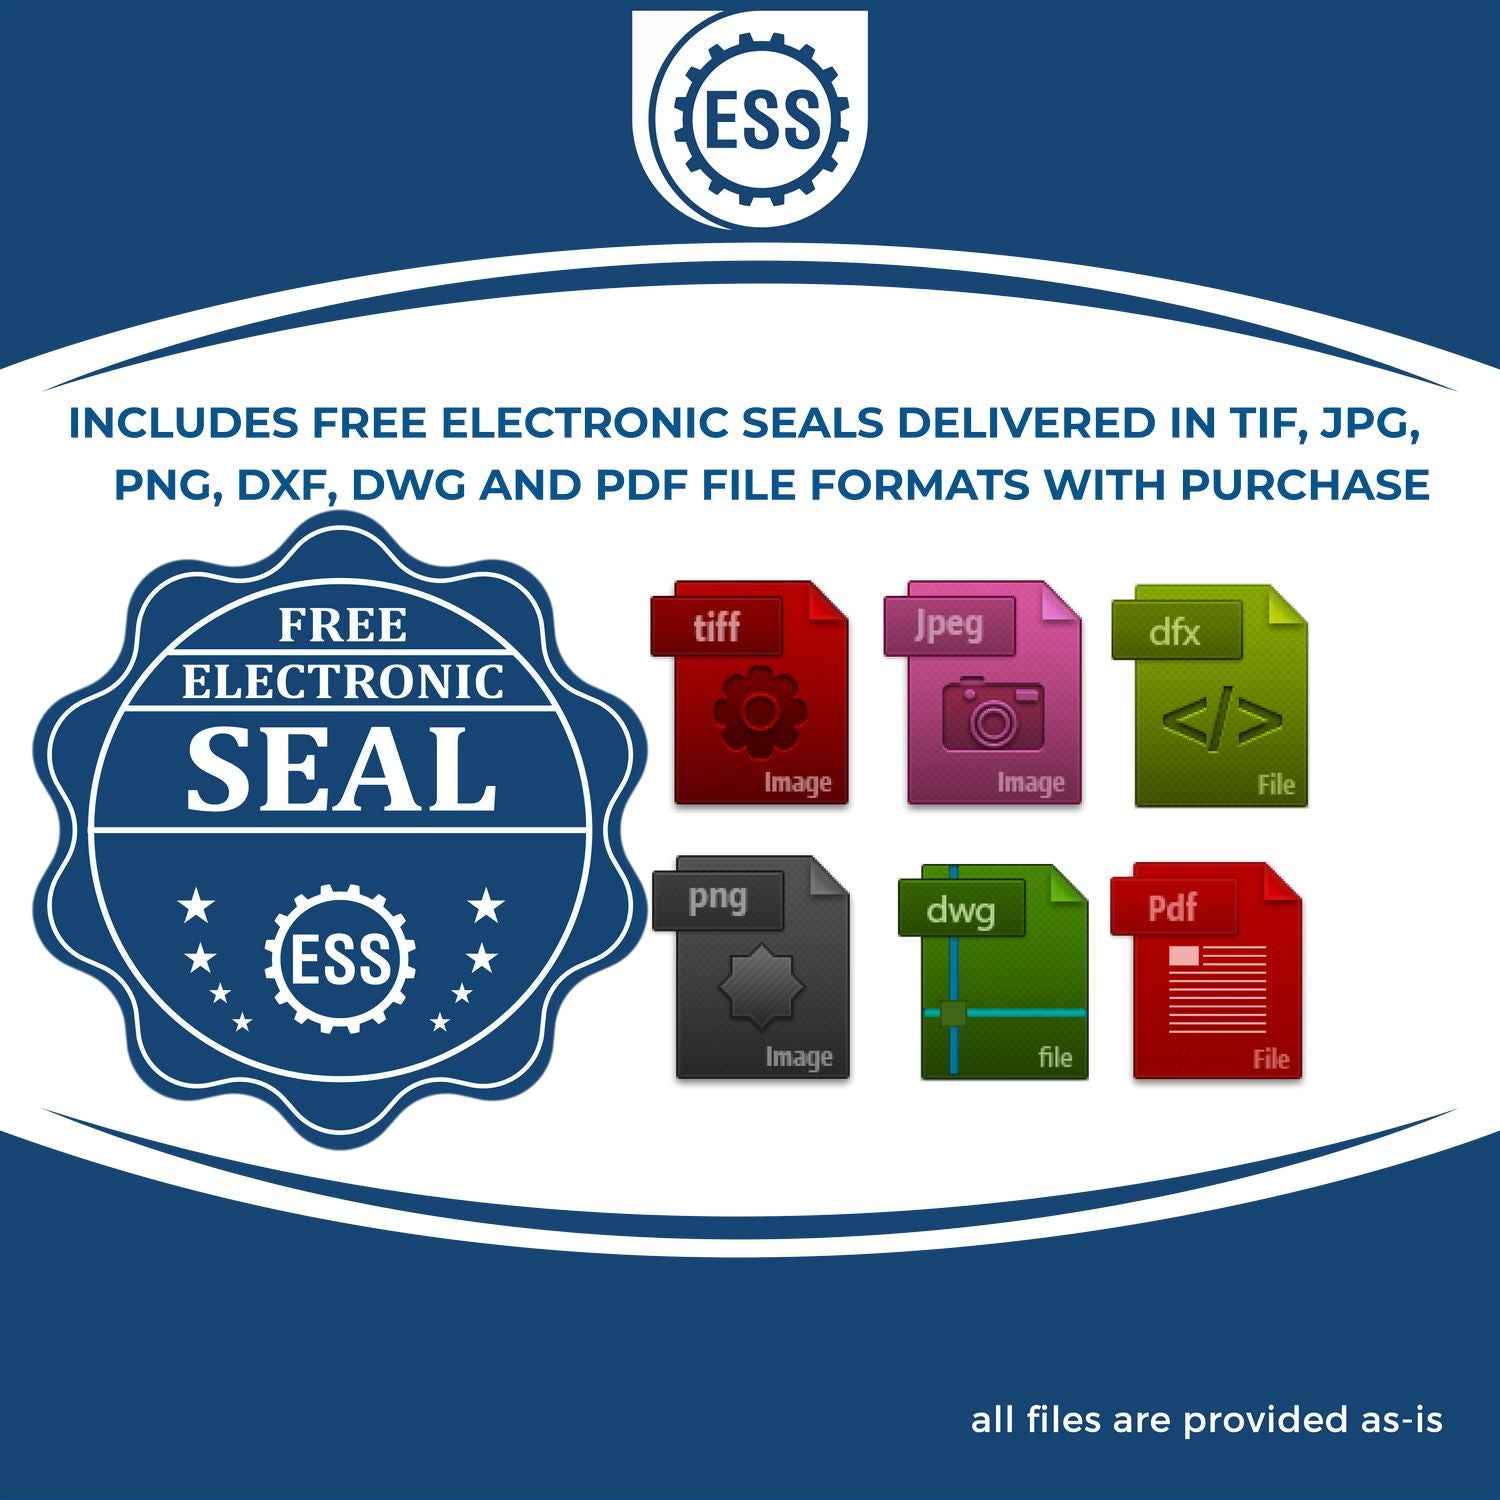 An infographic for the free electronic seal for the Heavy Duty Cast Iron New Mexico Land Surveyor Seal Embosser illustrating the different file type icons such as DXF, DWG, TIF, JPG and PNG.